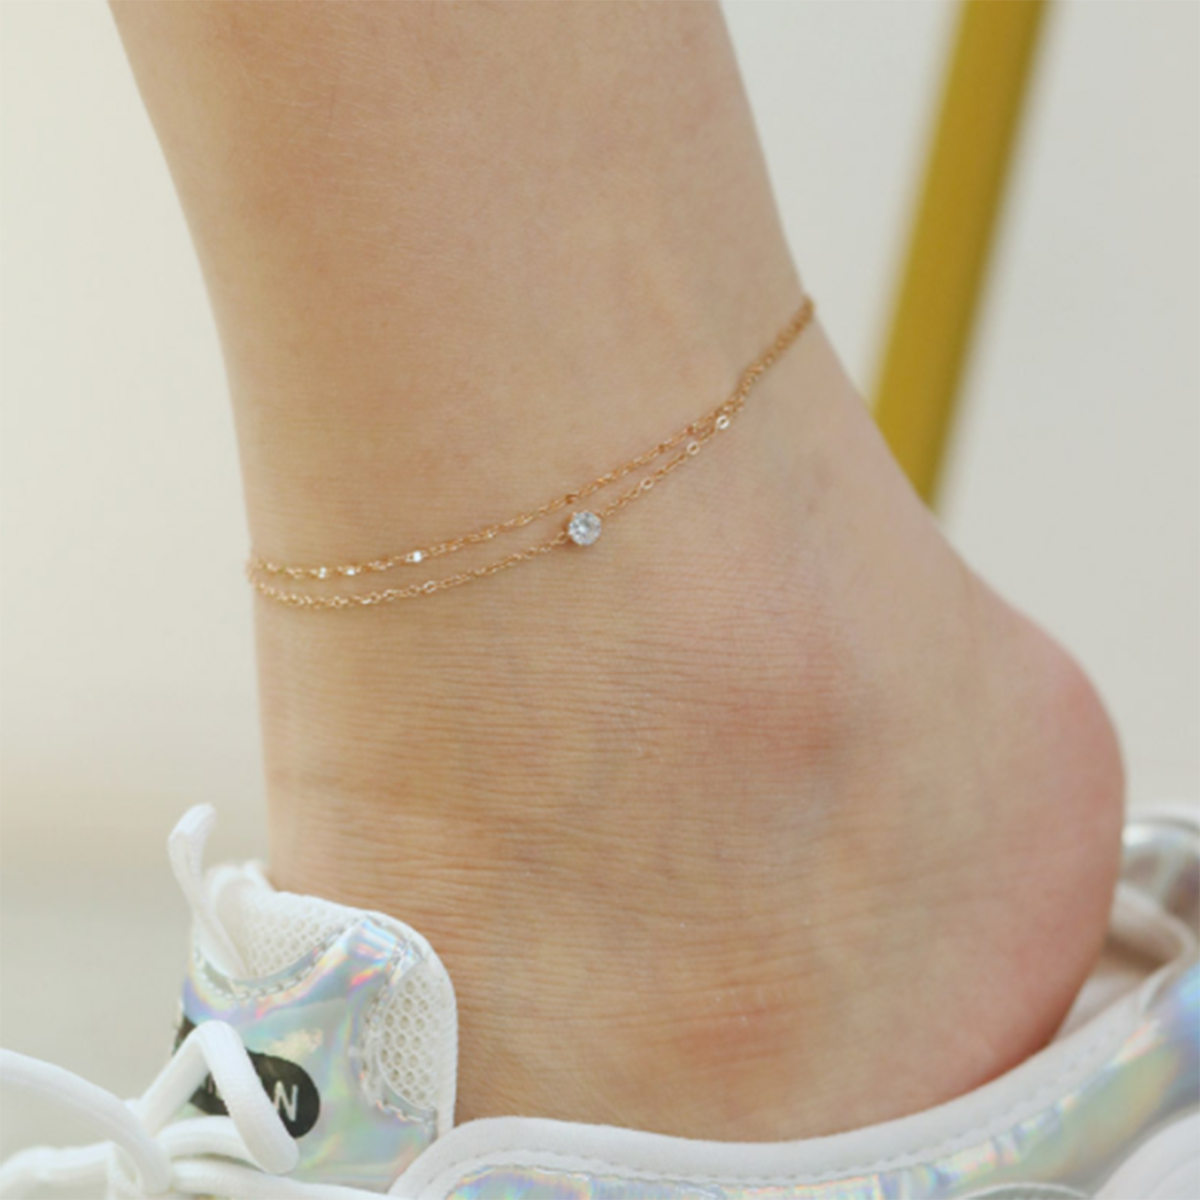 Anklets Adjustable Anklet Foot Jewelry for Christmas Valentine's Day